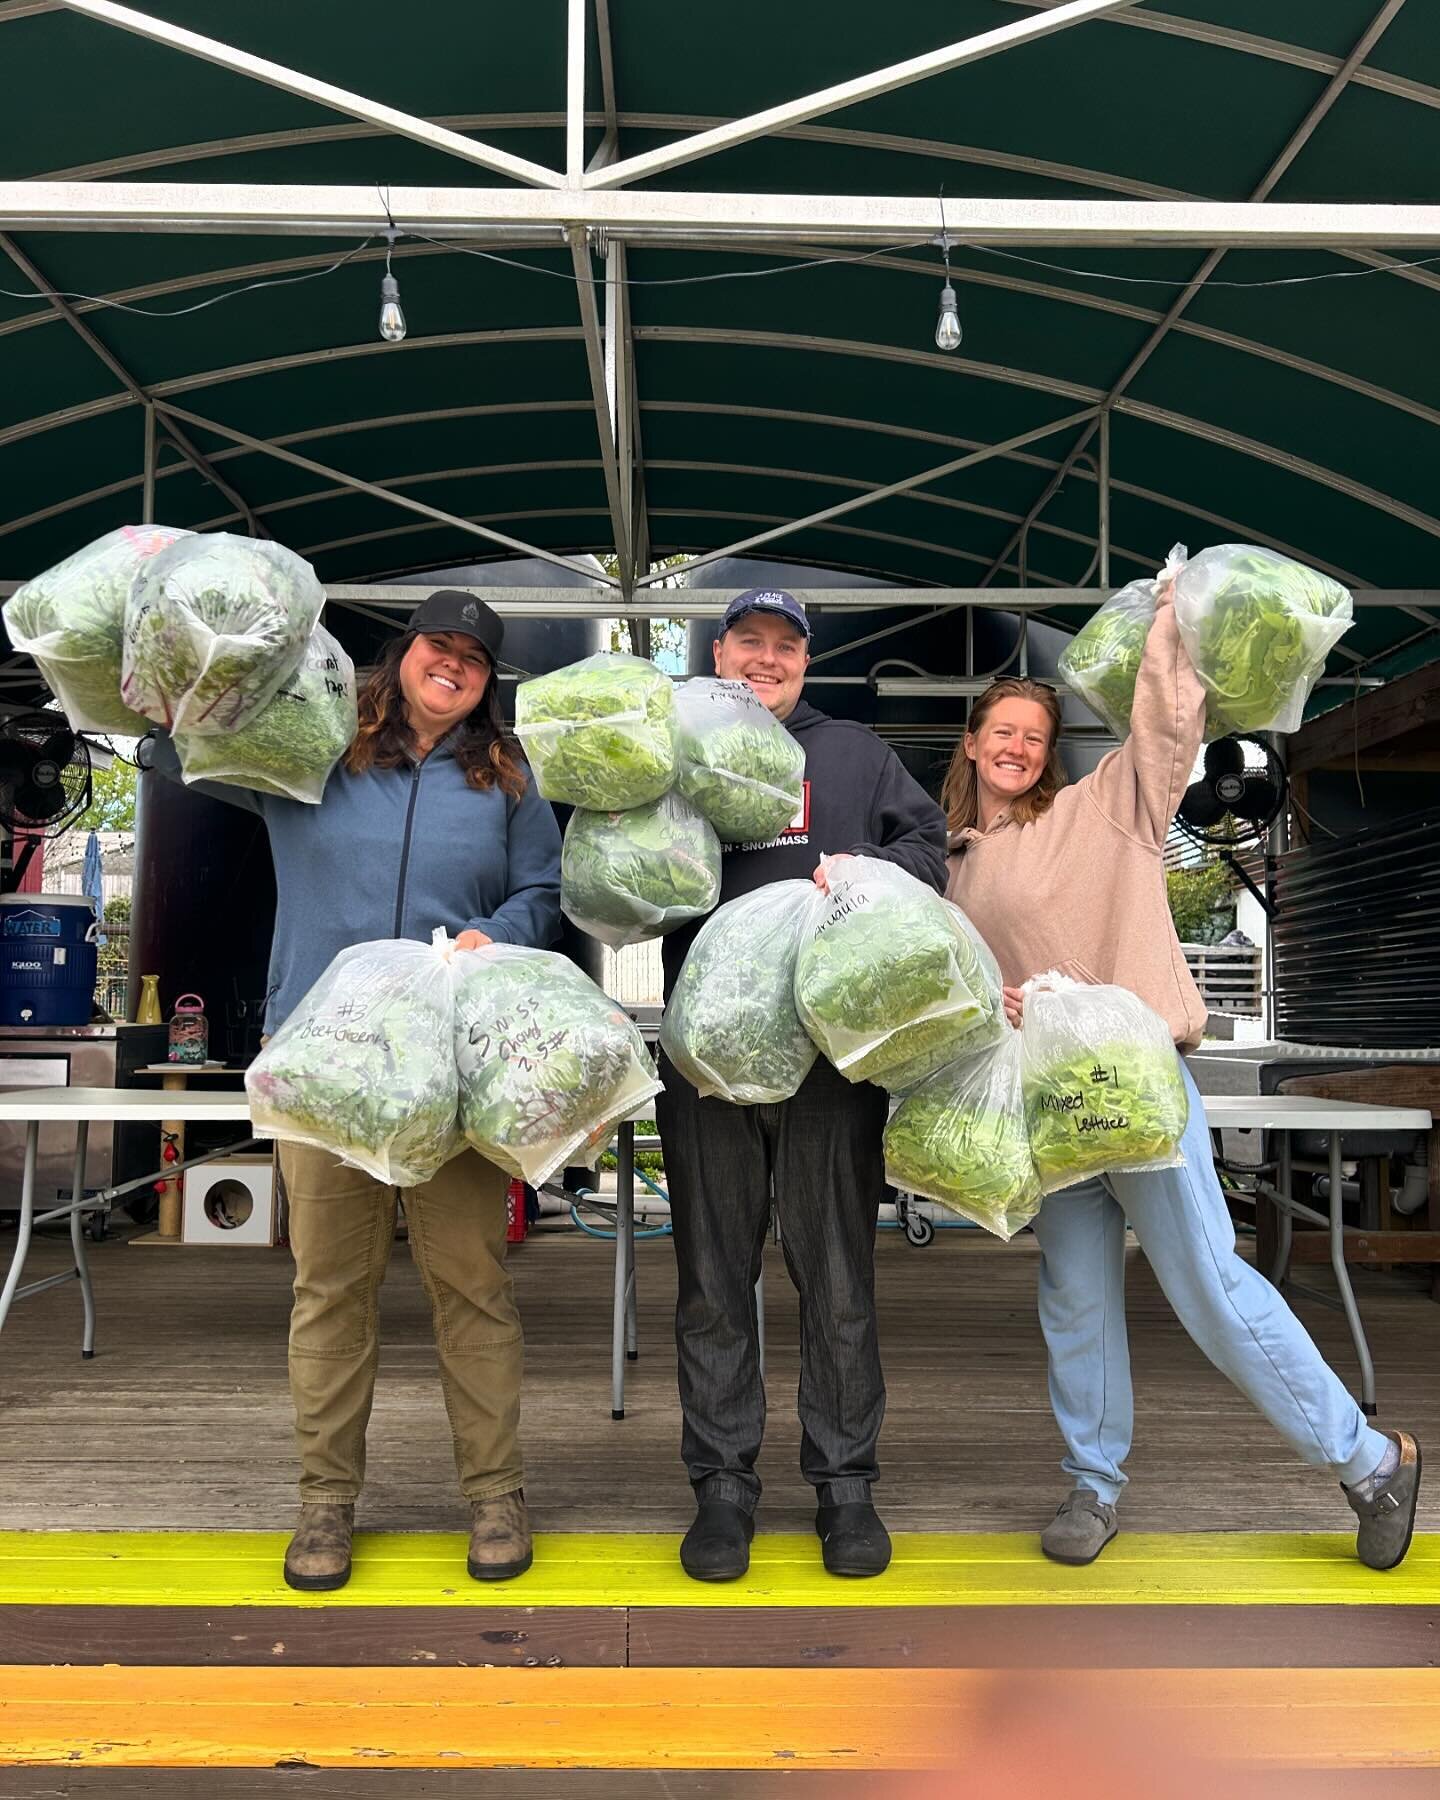 Look for our lettuce in your salads @tableraleigh, one of our fav #farmshare partners. We&rsquo;ve been sharing our produce with them since 2020 &mdash; upwards of 3,750# &mdash; and we&rsquo;re in awe of how they advance their mission to provide com